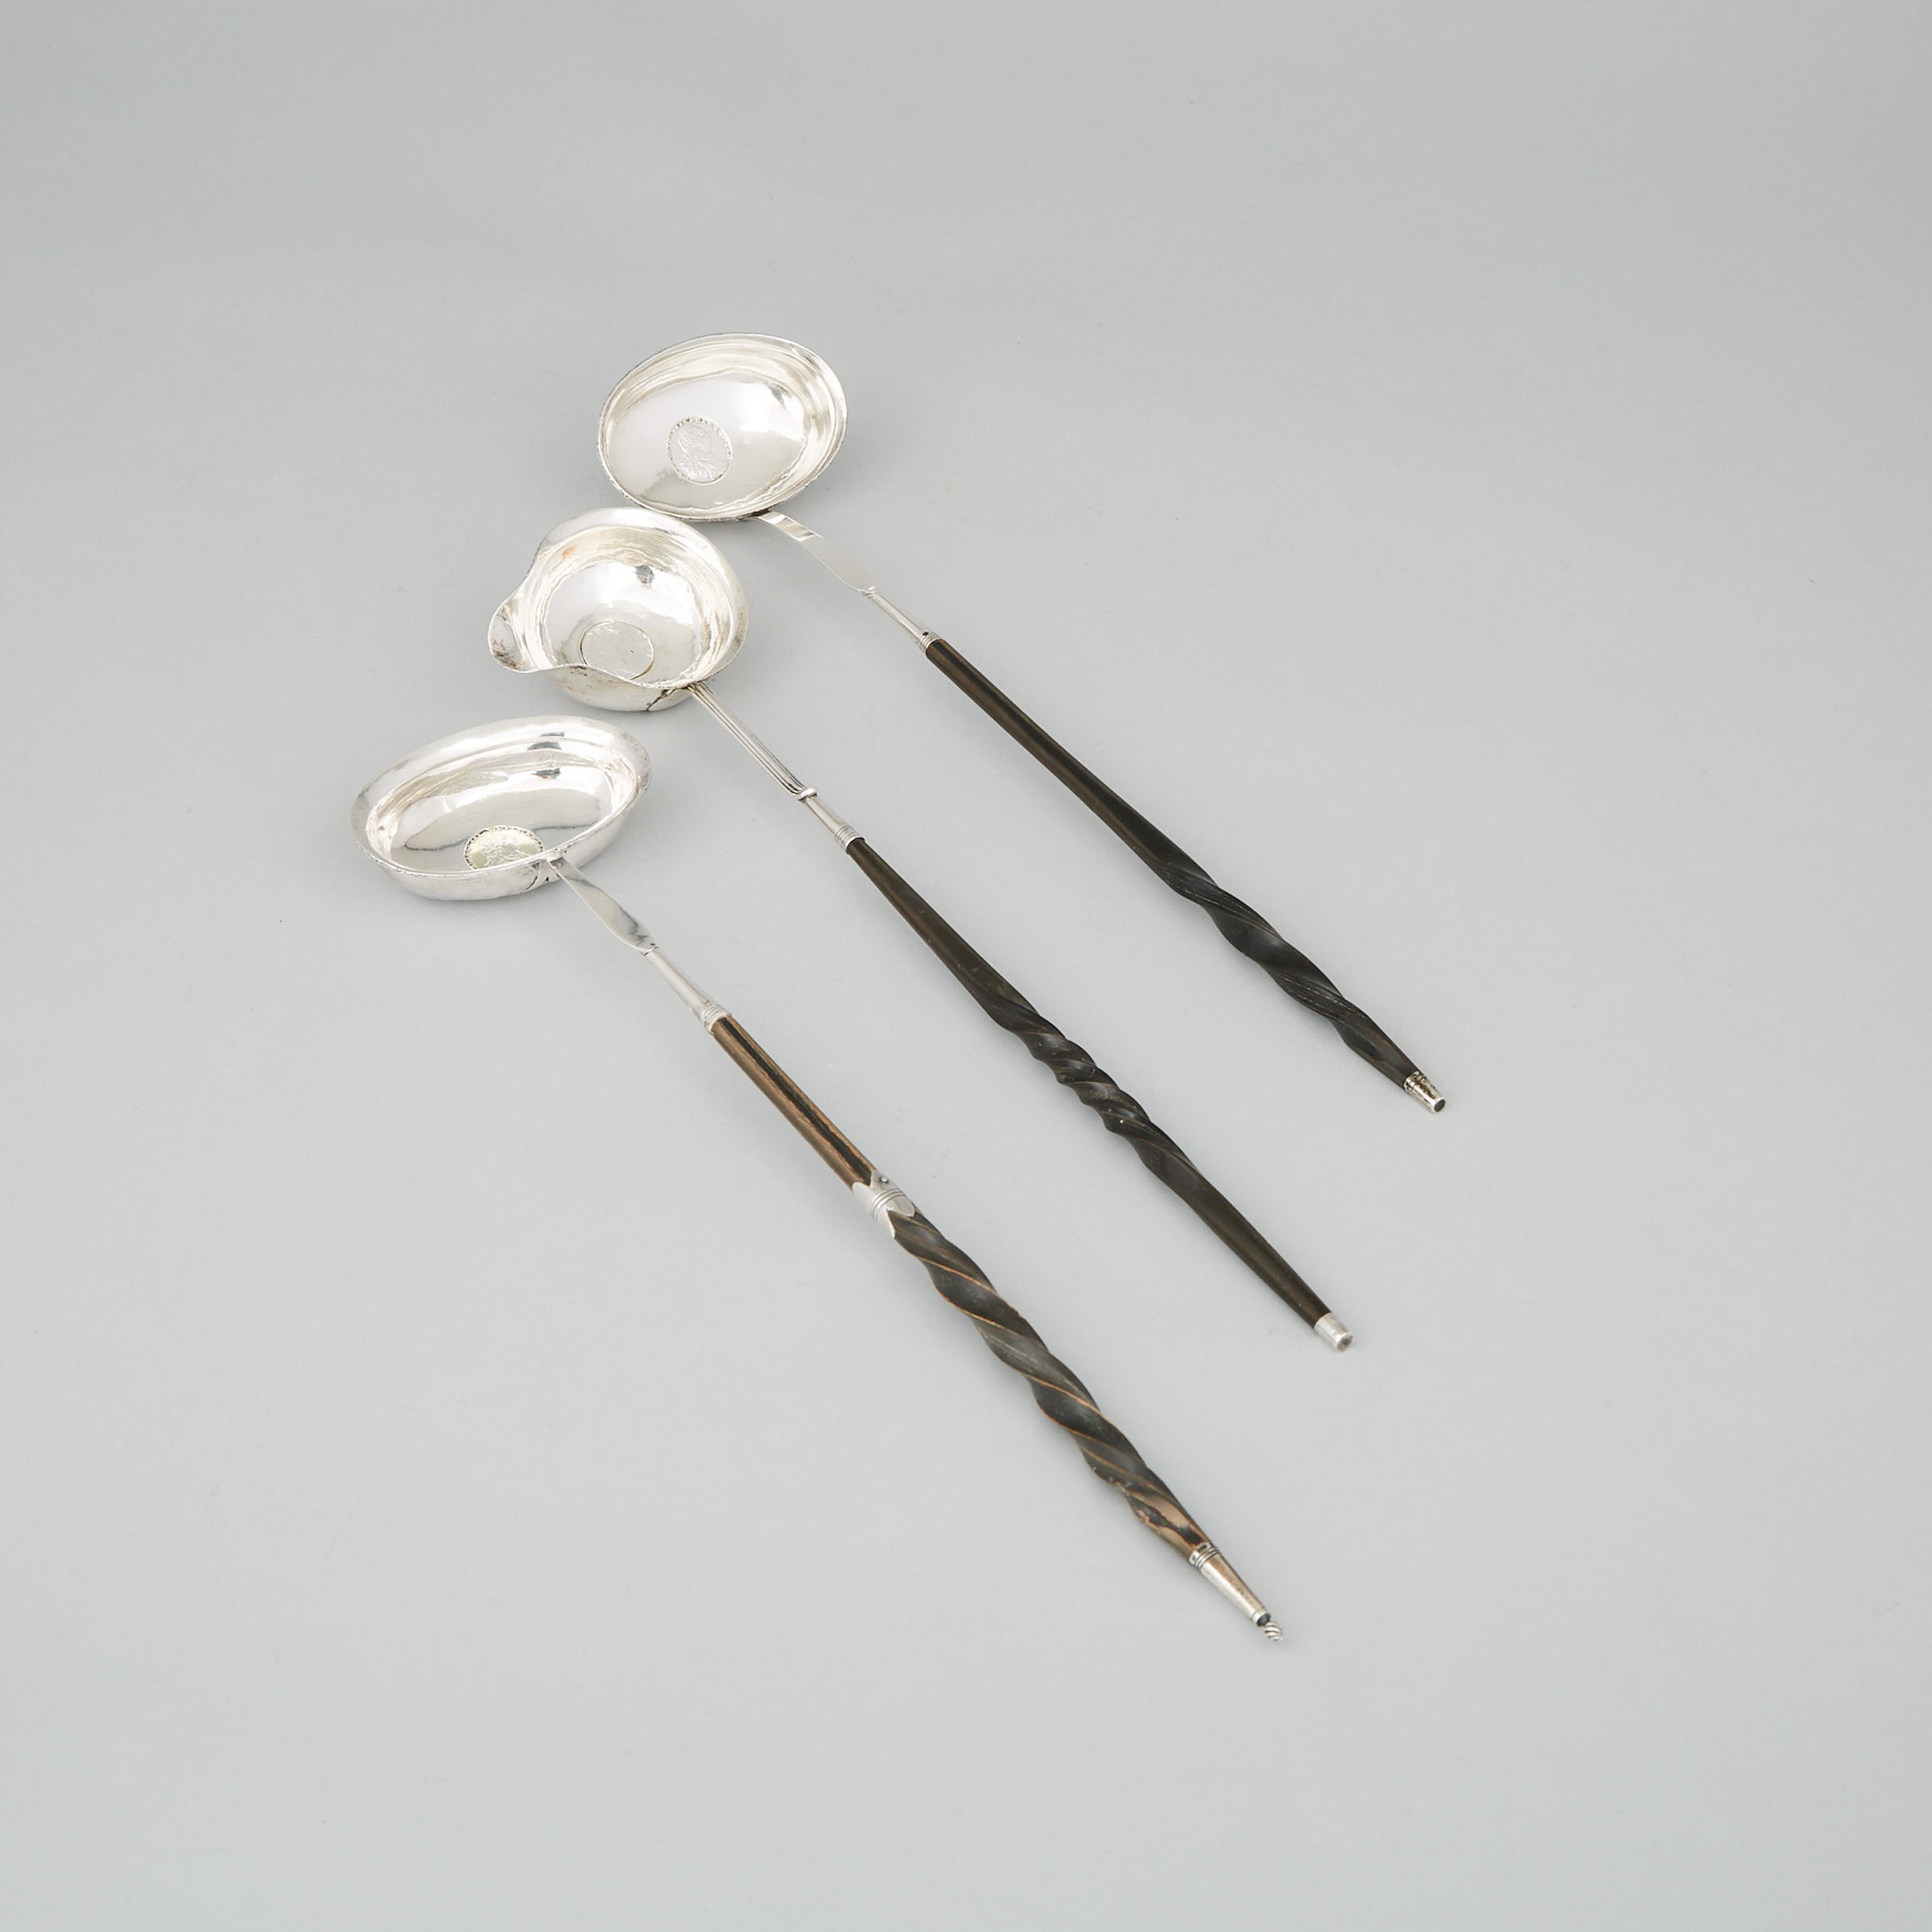 Three George III Silver Toddy Ladles, late 18th century